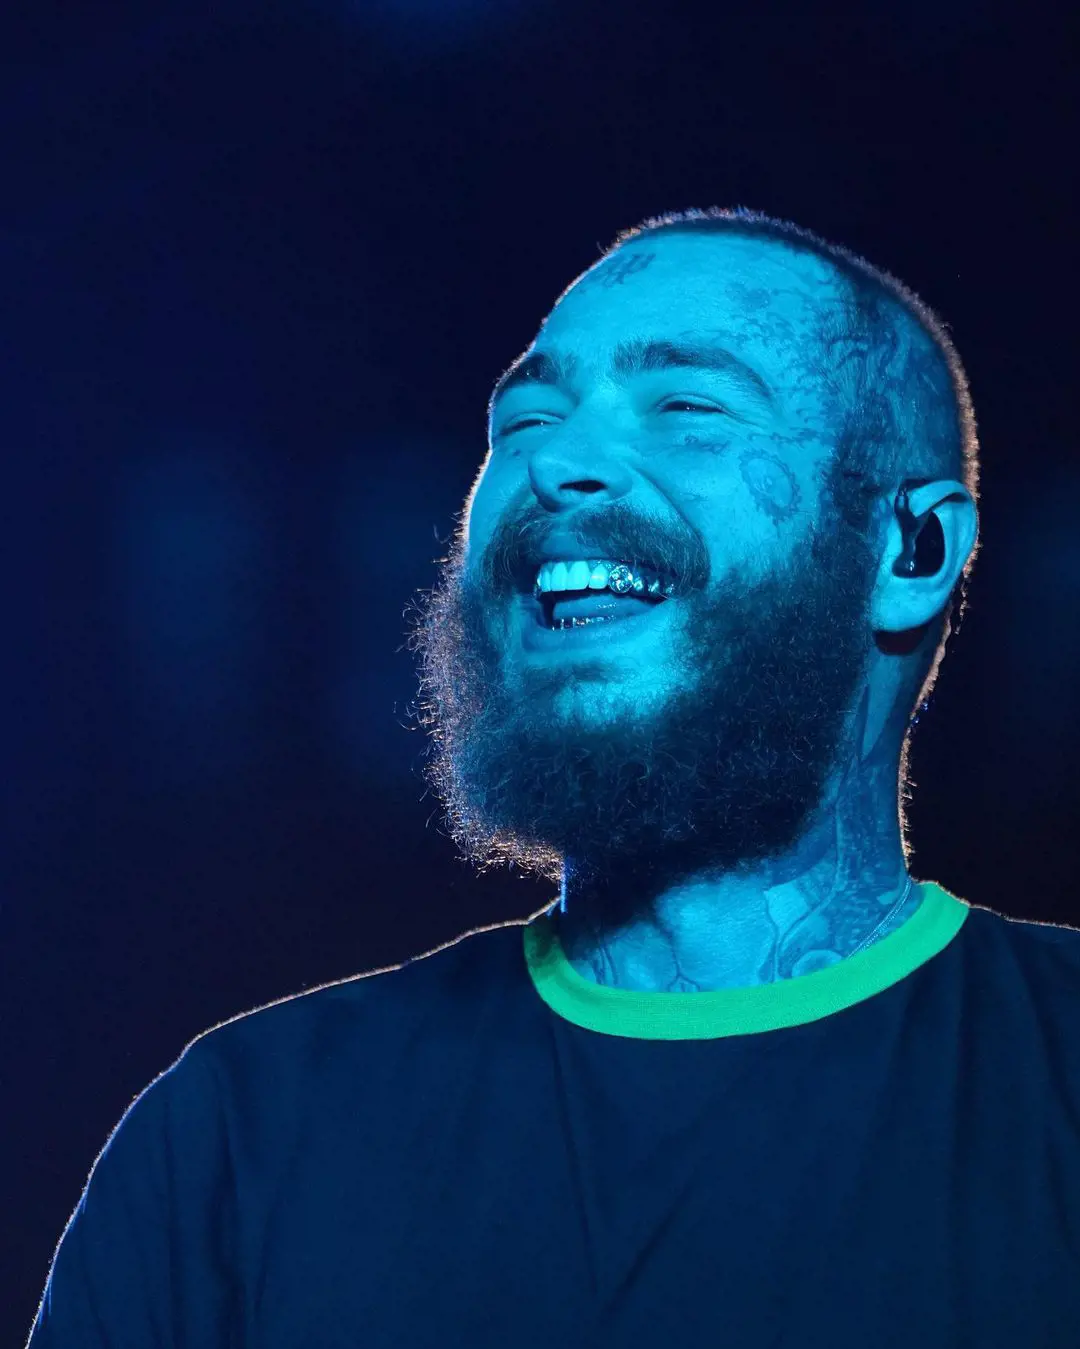 Rapper Post Malone performs onstage with a prominent smile showing his golden tooth pictured by his personal photographer Adam Degross